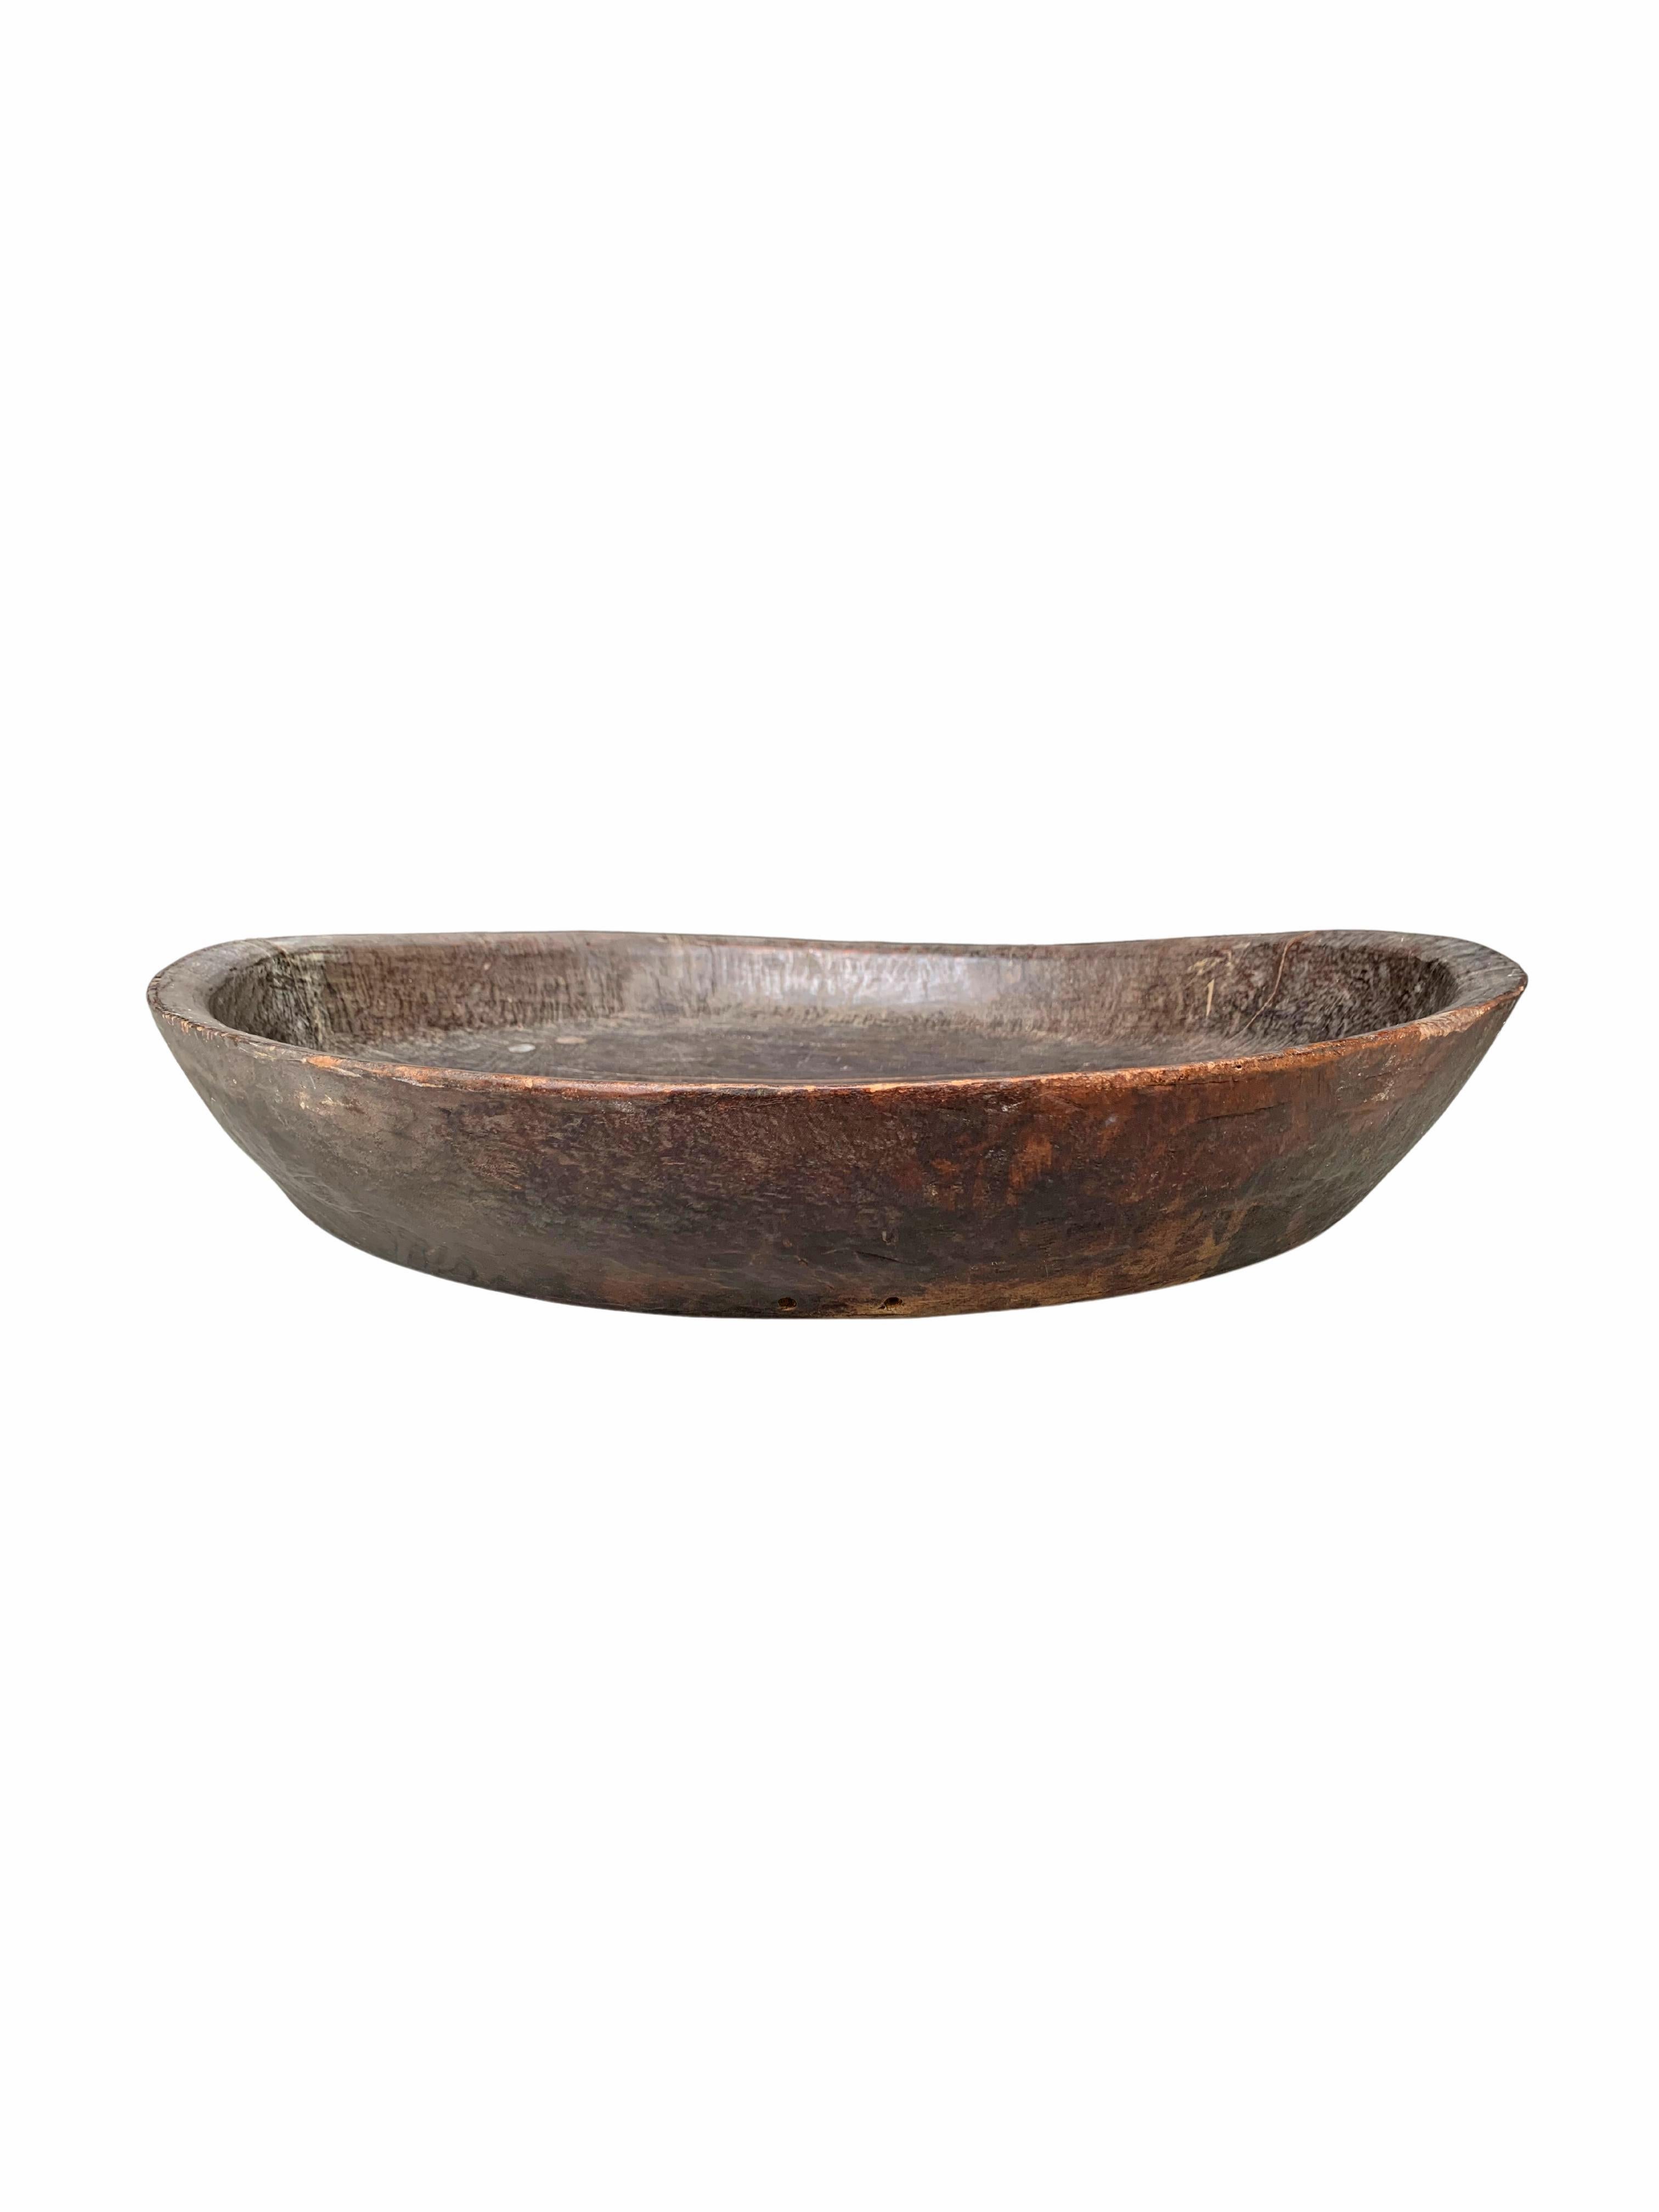 Other Dayak Tribe Ironwood Bowl, Early 20th Century For Sale